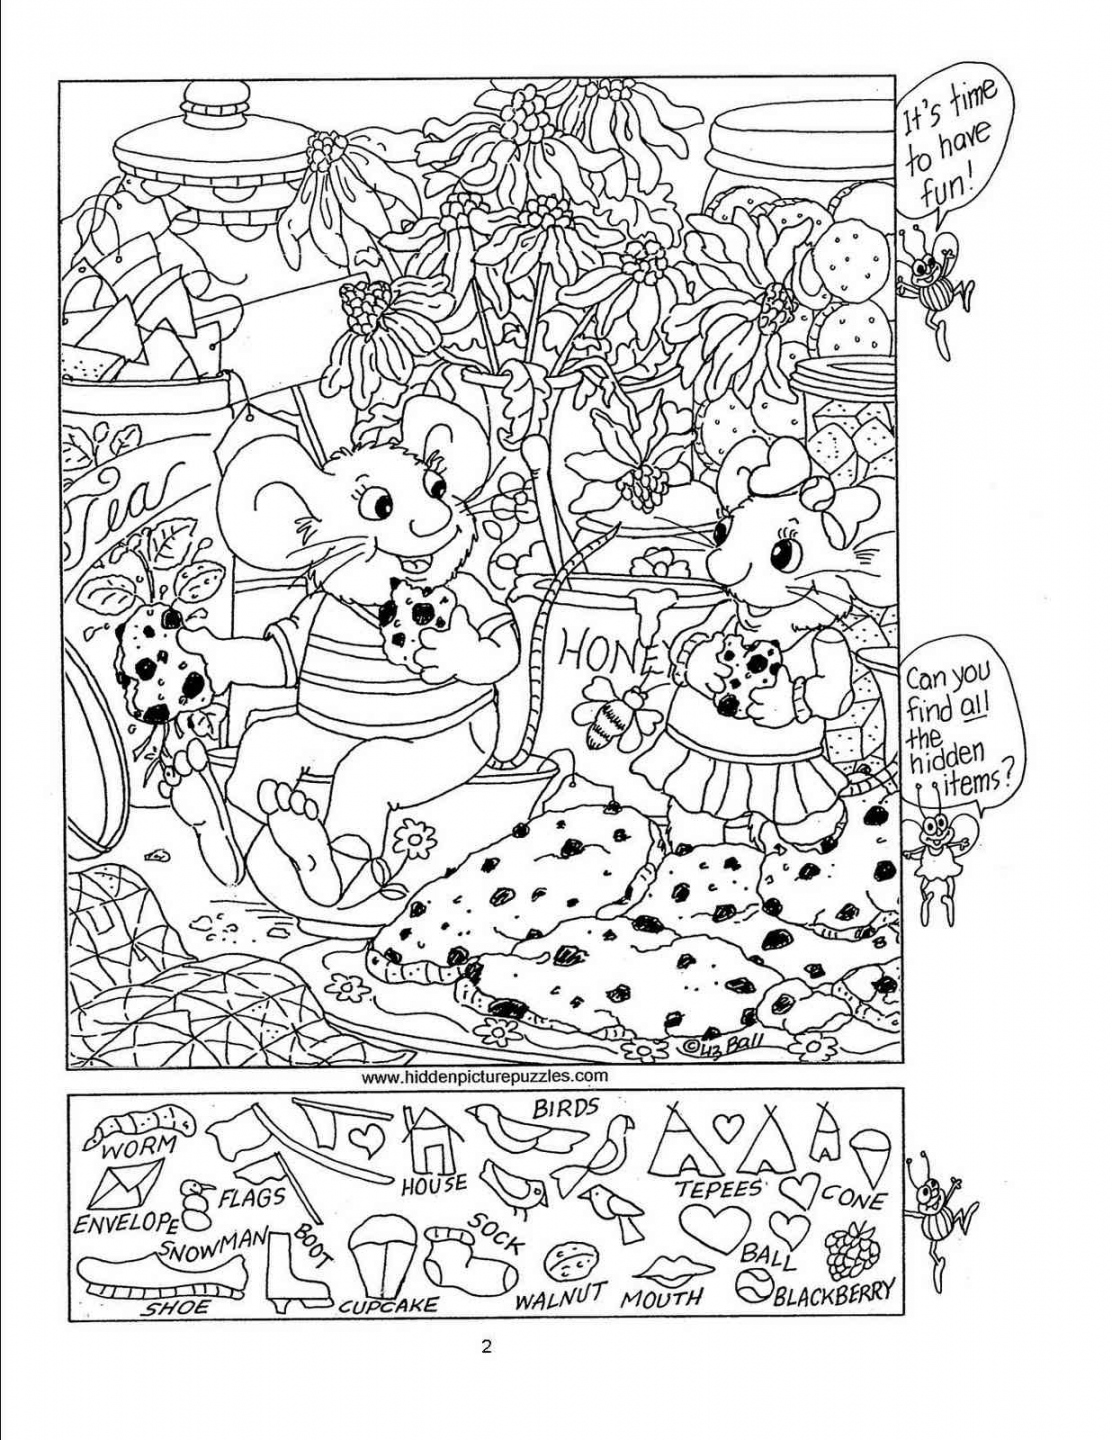 Free Hidden Pictures Printable - Printable - Free, Printable Hidden Picture Puzzles for Kids